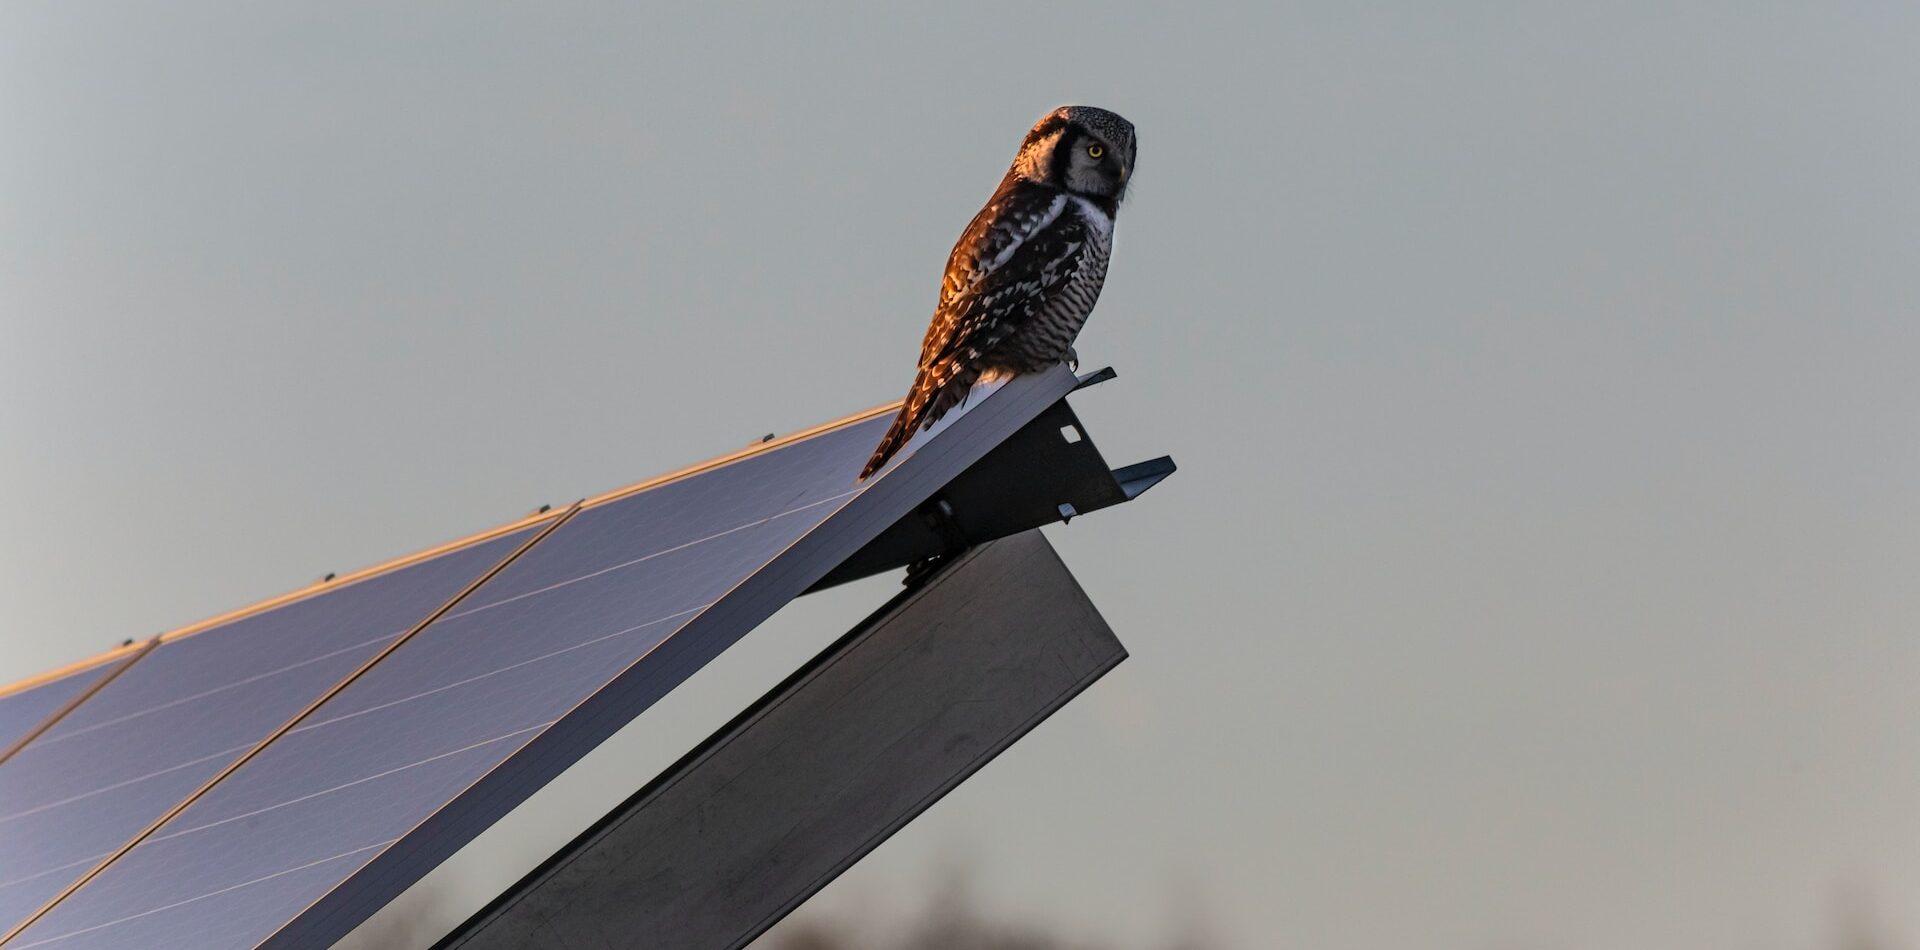 An image showing the process of pigeon proofing solar panels in the UK, including the cost of how much does it cost to pigeon proofing solar panels uk.